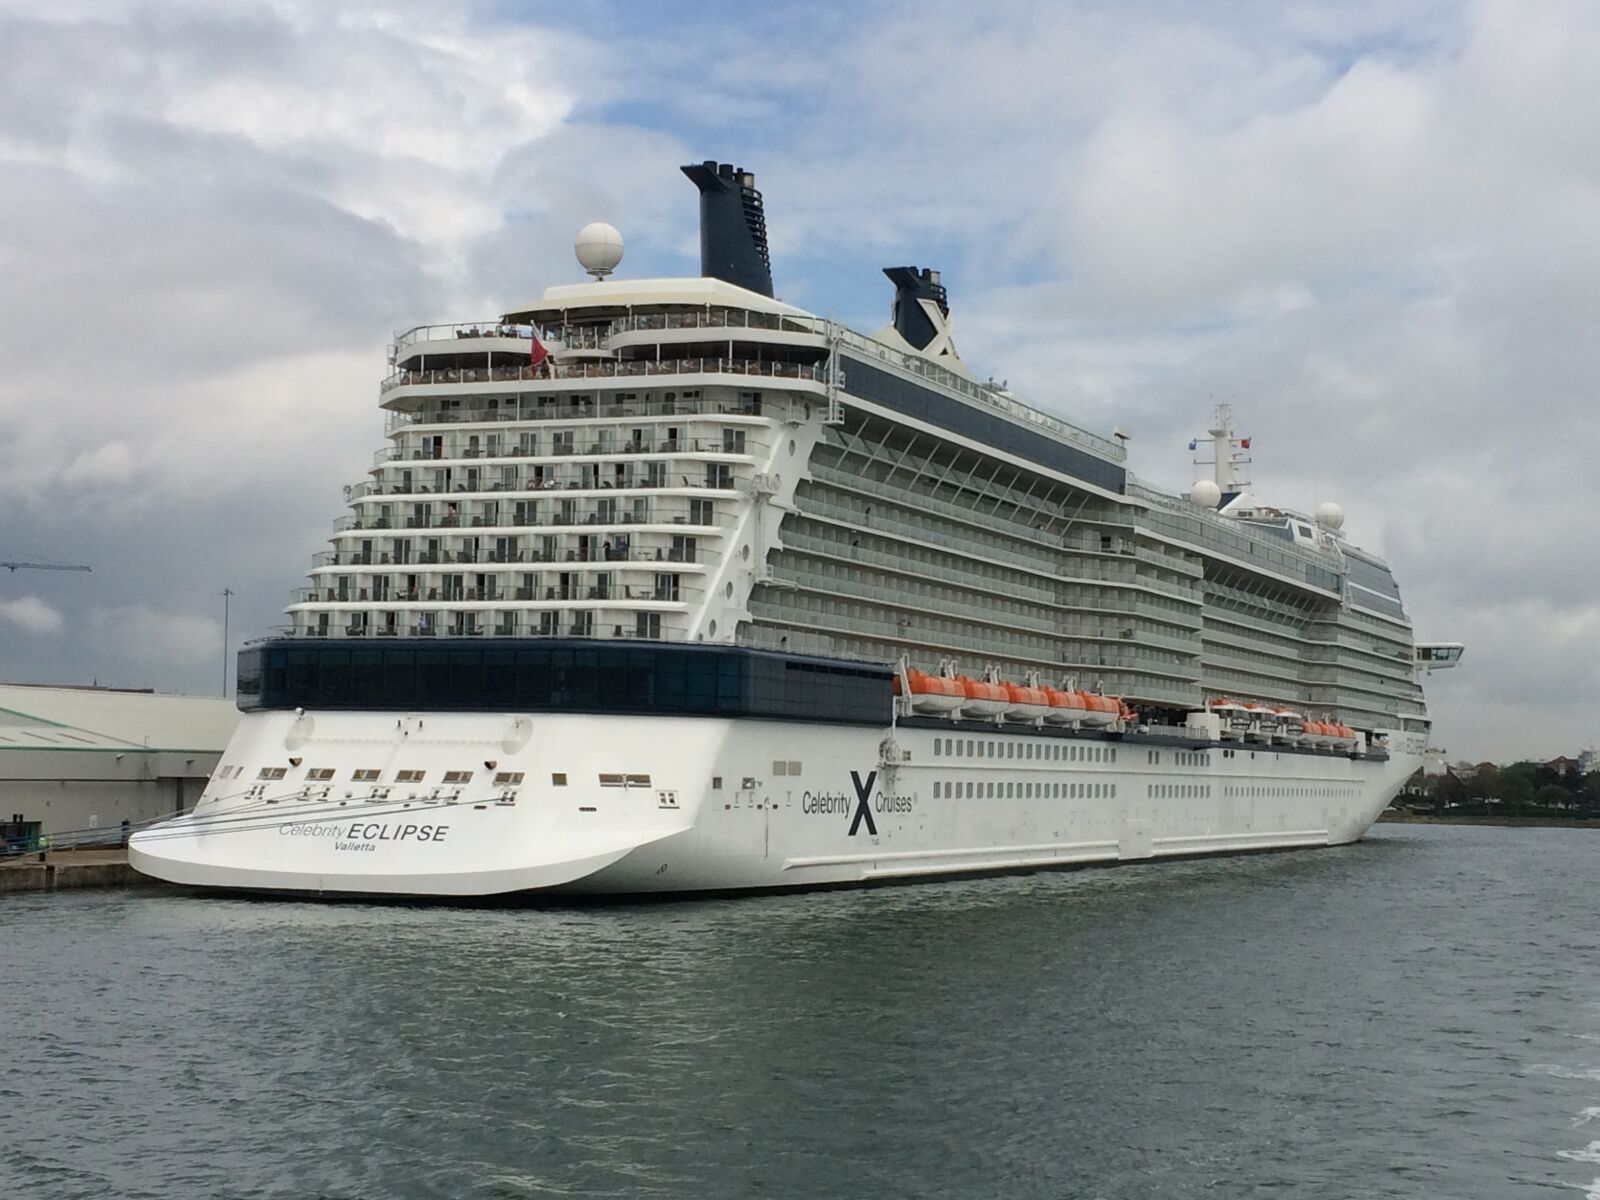 Apple iPhone 5s sample photo. Celebrity eclipse, cruise liner photography